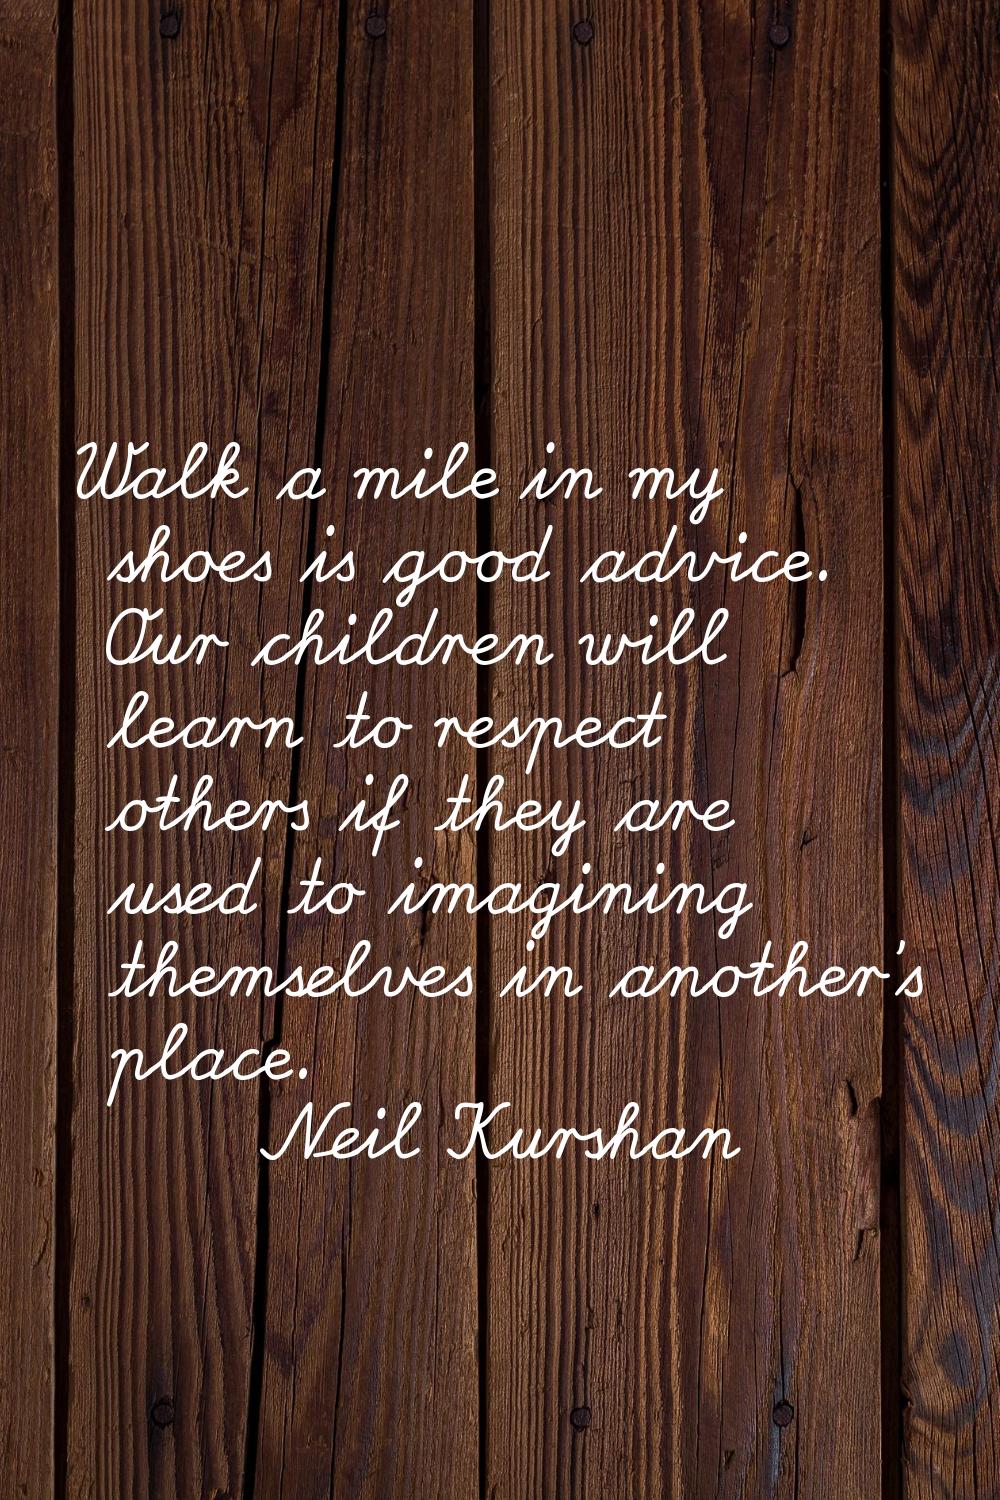 Walk a mile in my shoes is good advice. Our children will learn to respect others if they are used 